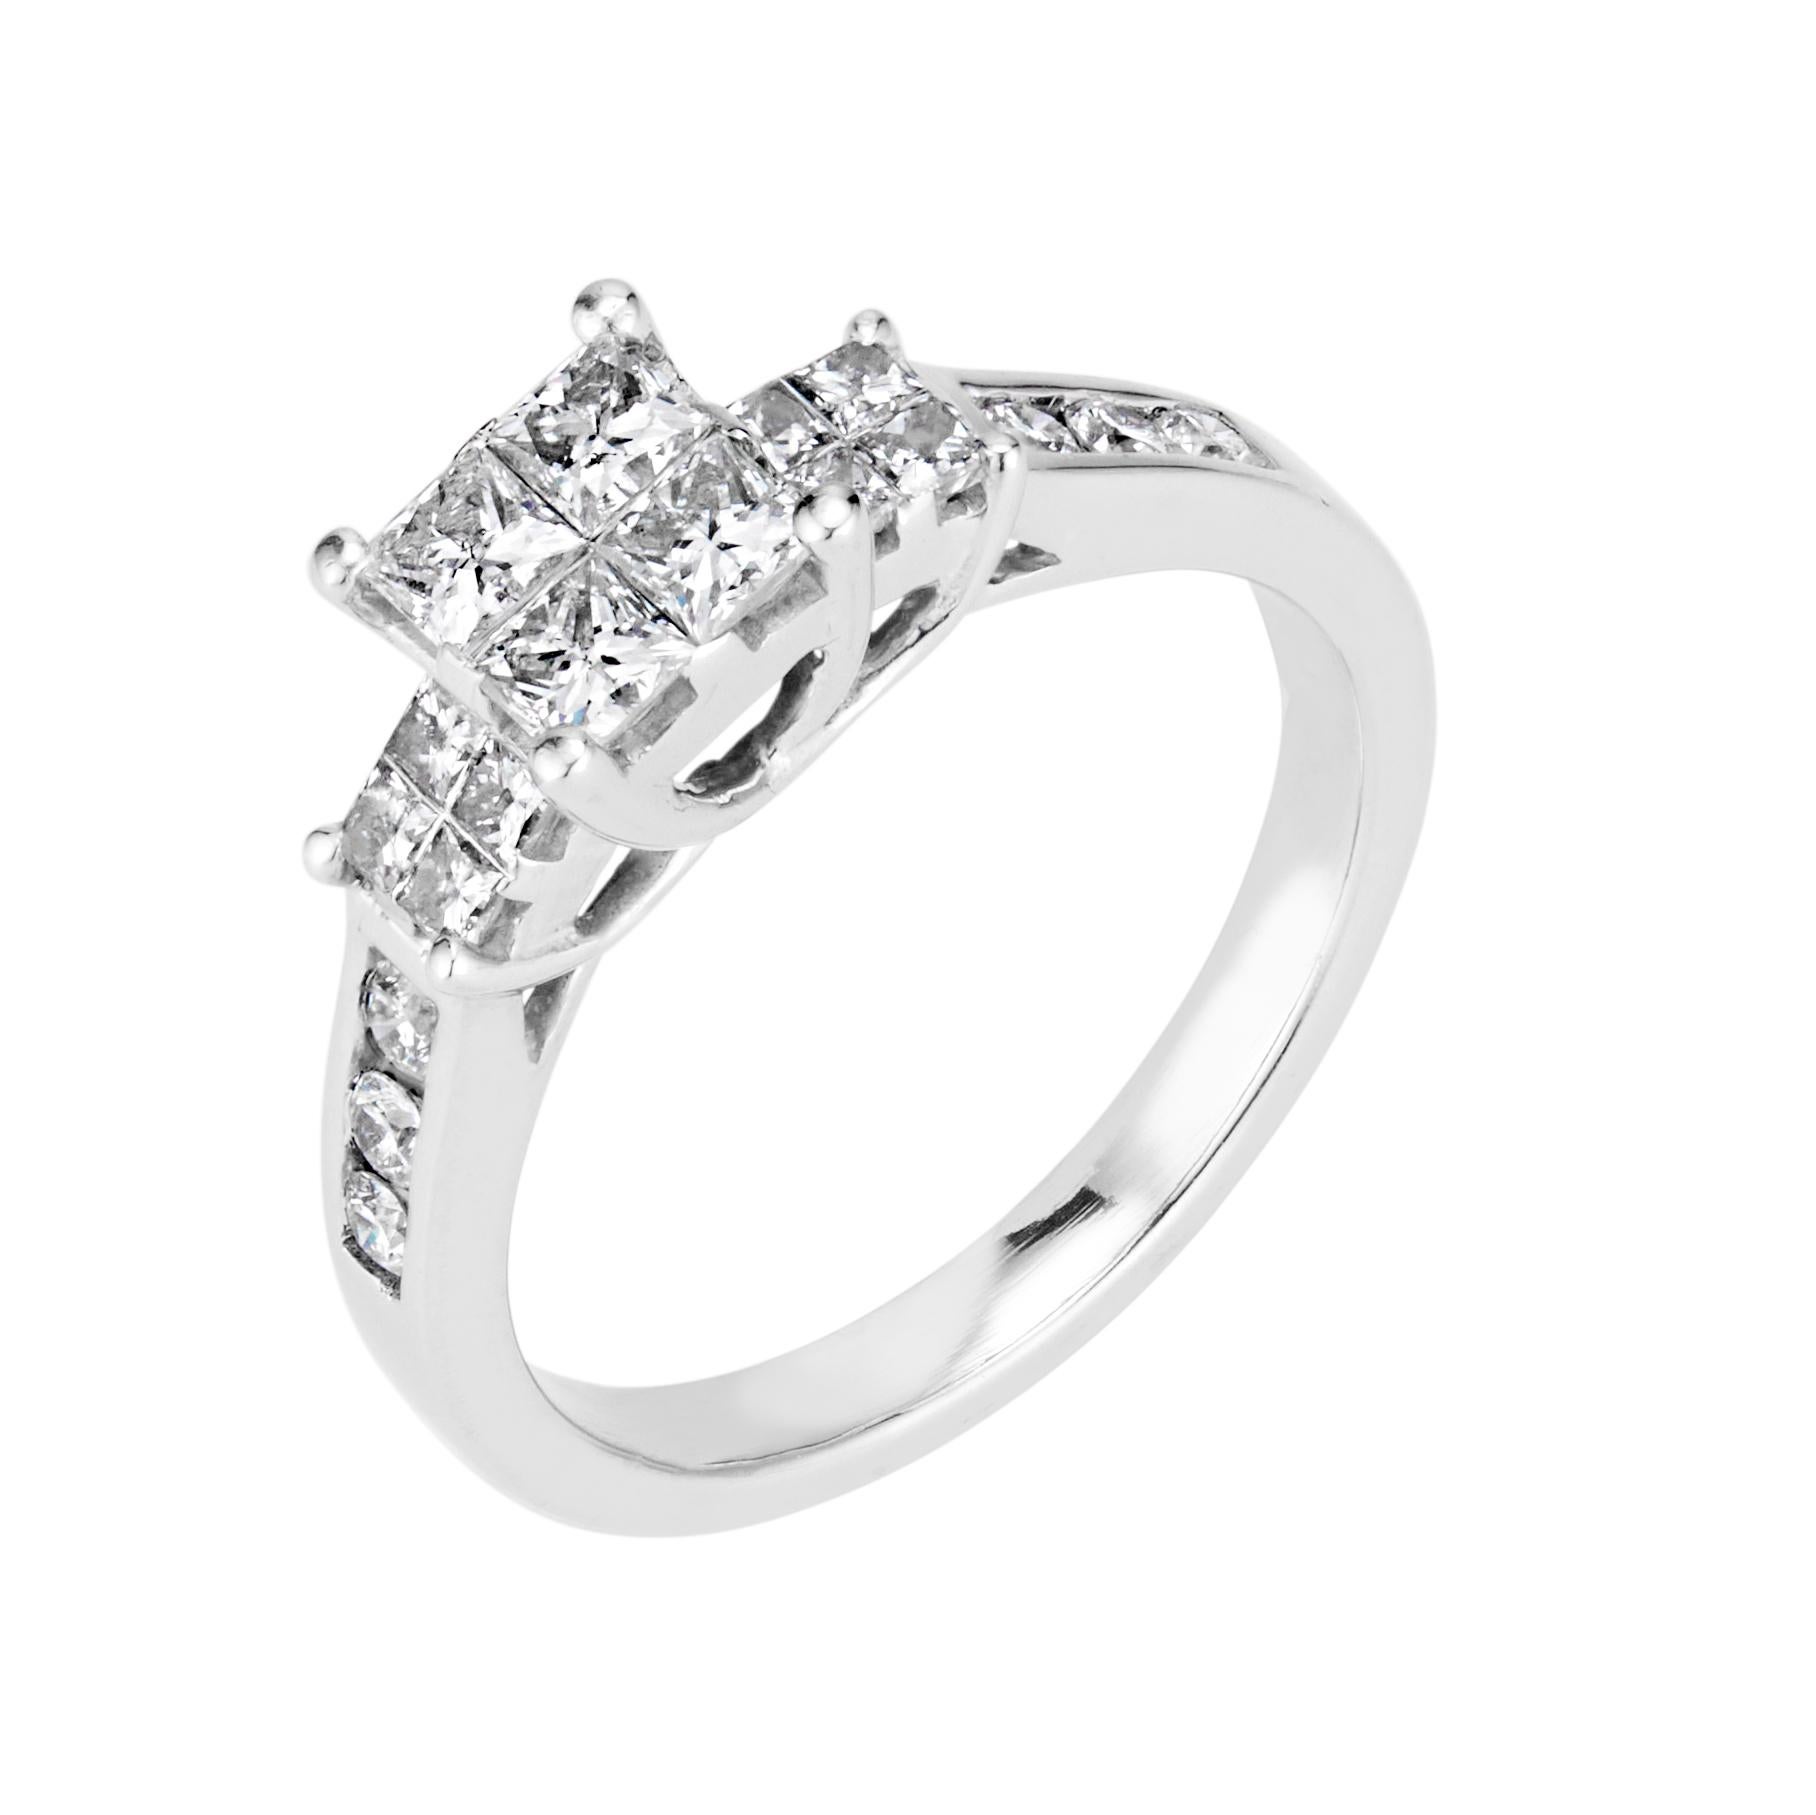 Invisible set princess cut engagement ring.  The princess cut diamonds are set in three groups of four diamonds each to give the look of a one carat center and .25 carat look on each side in 14k white gold setting.

12 princess cut diamonds, H-I SI